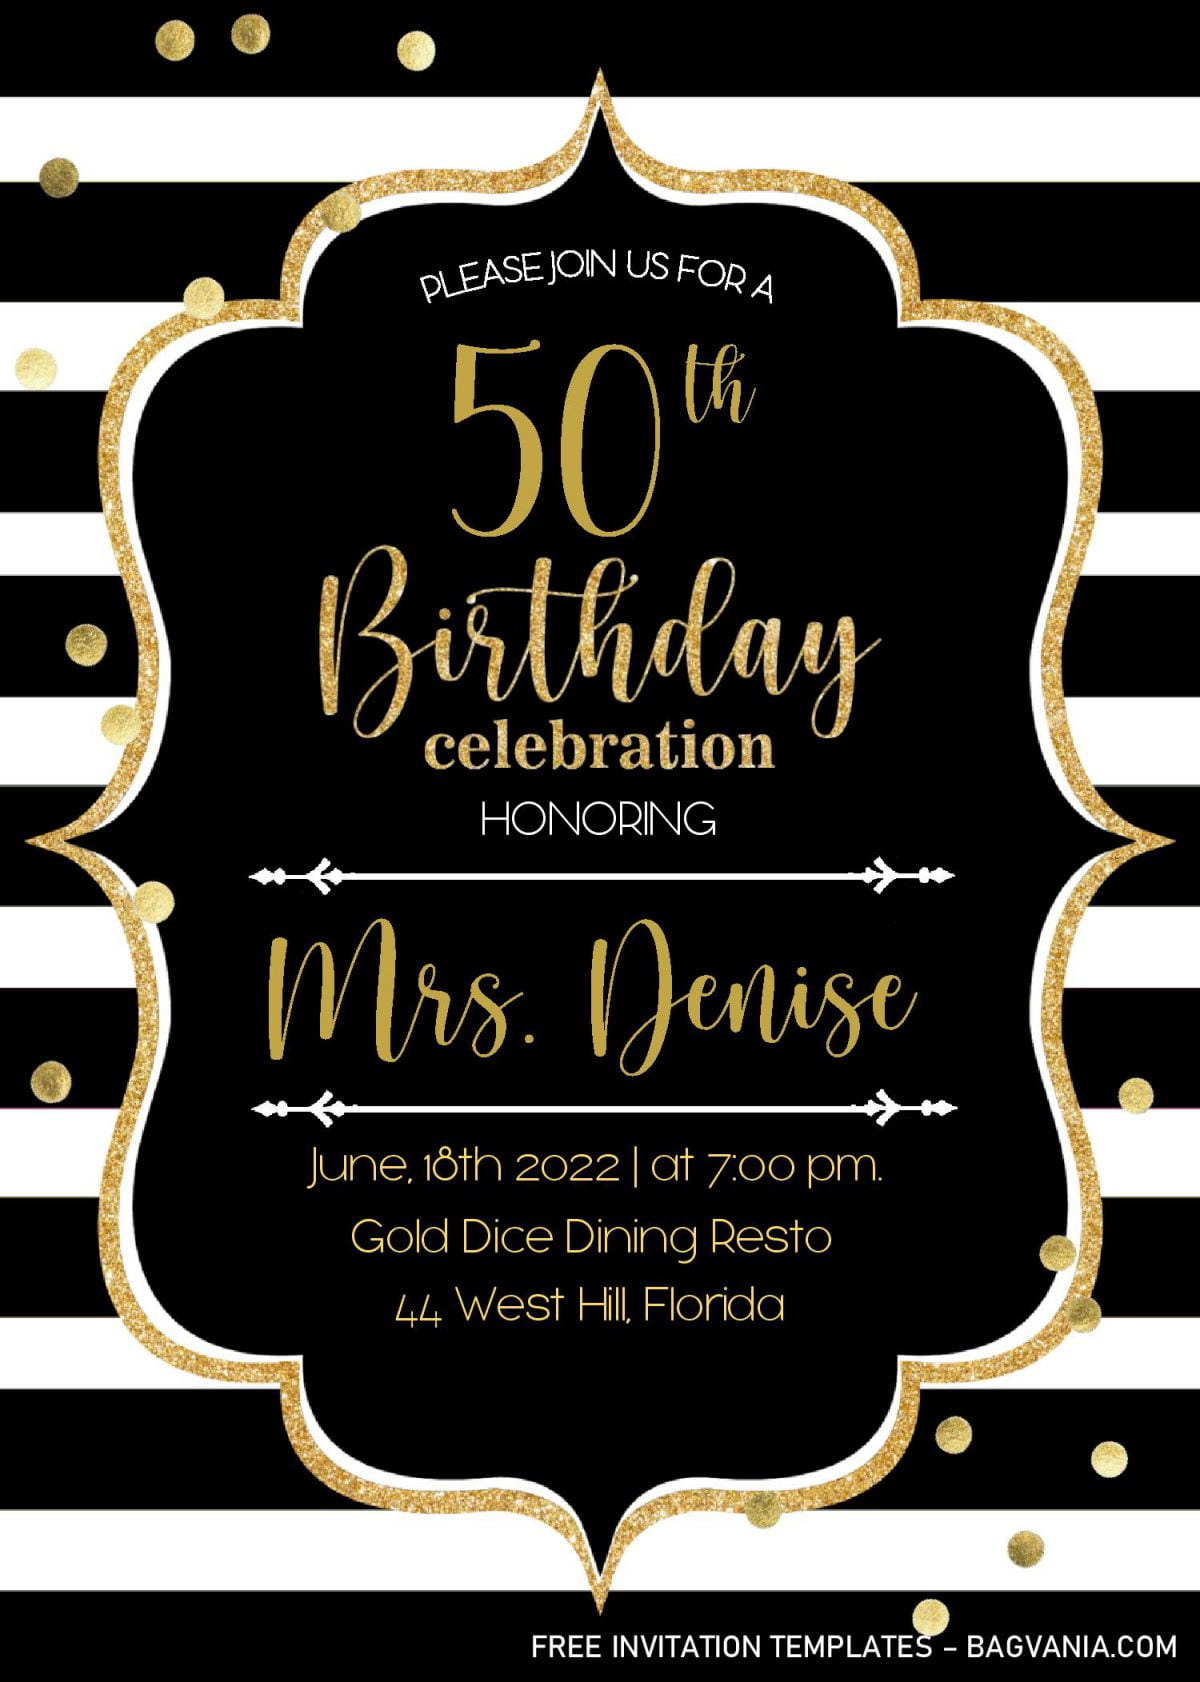 Black And Gold 50th Birthday Invitation Templates - Editable With MS Word and has 